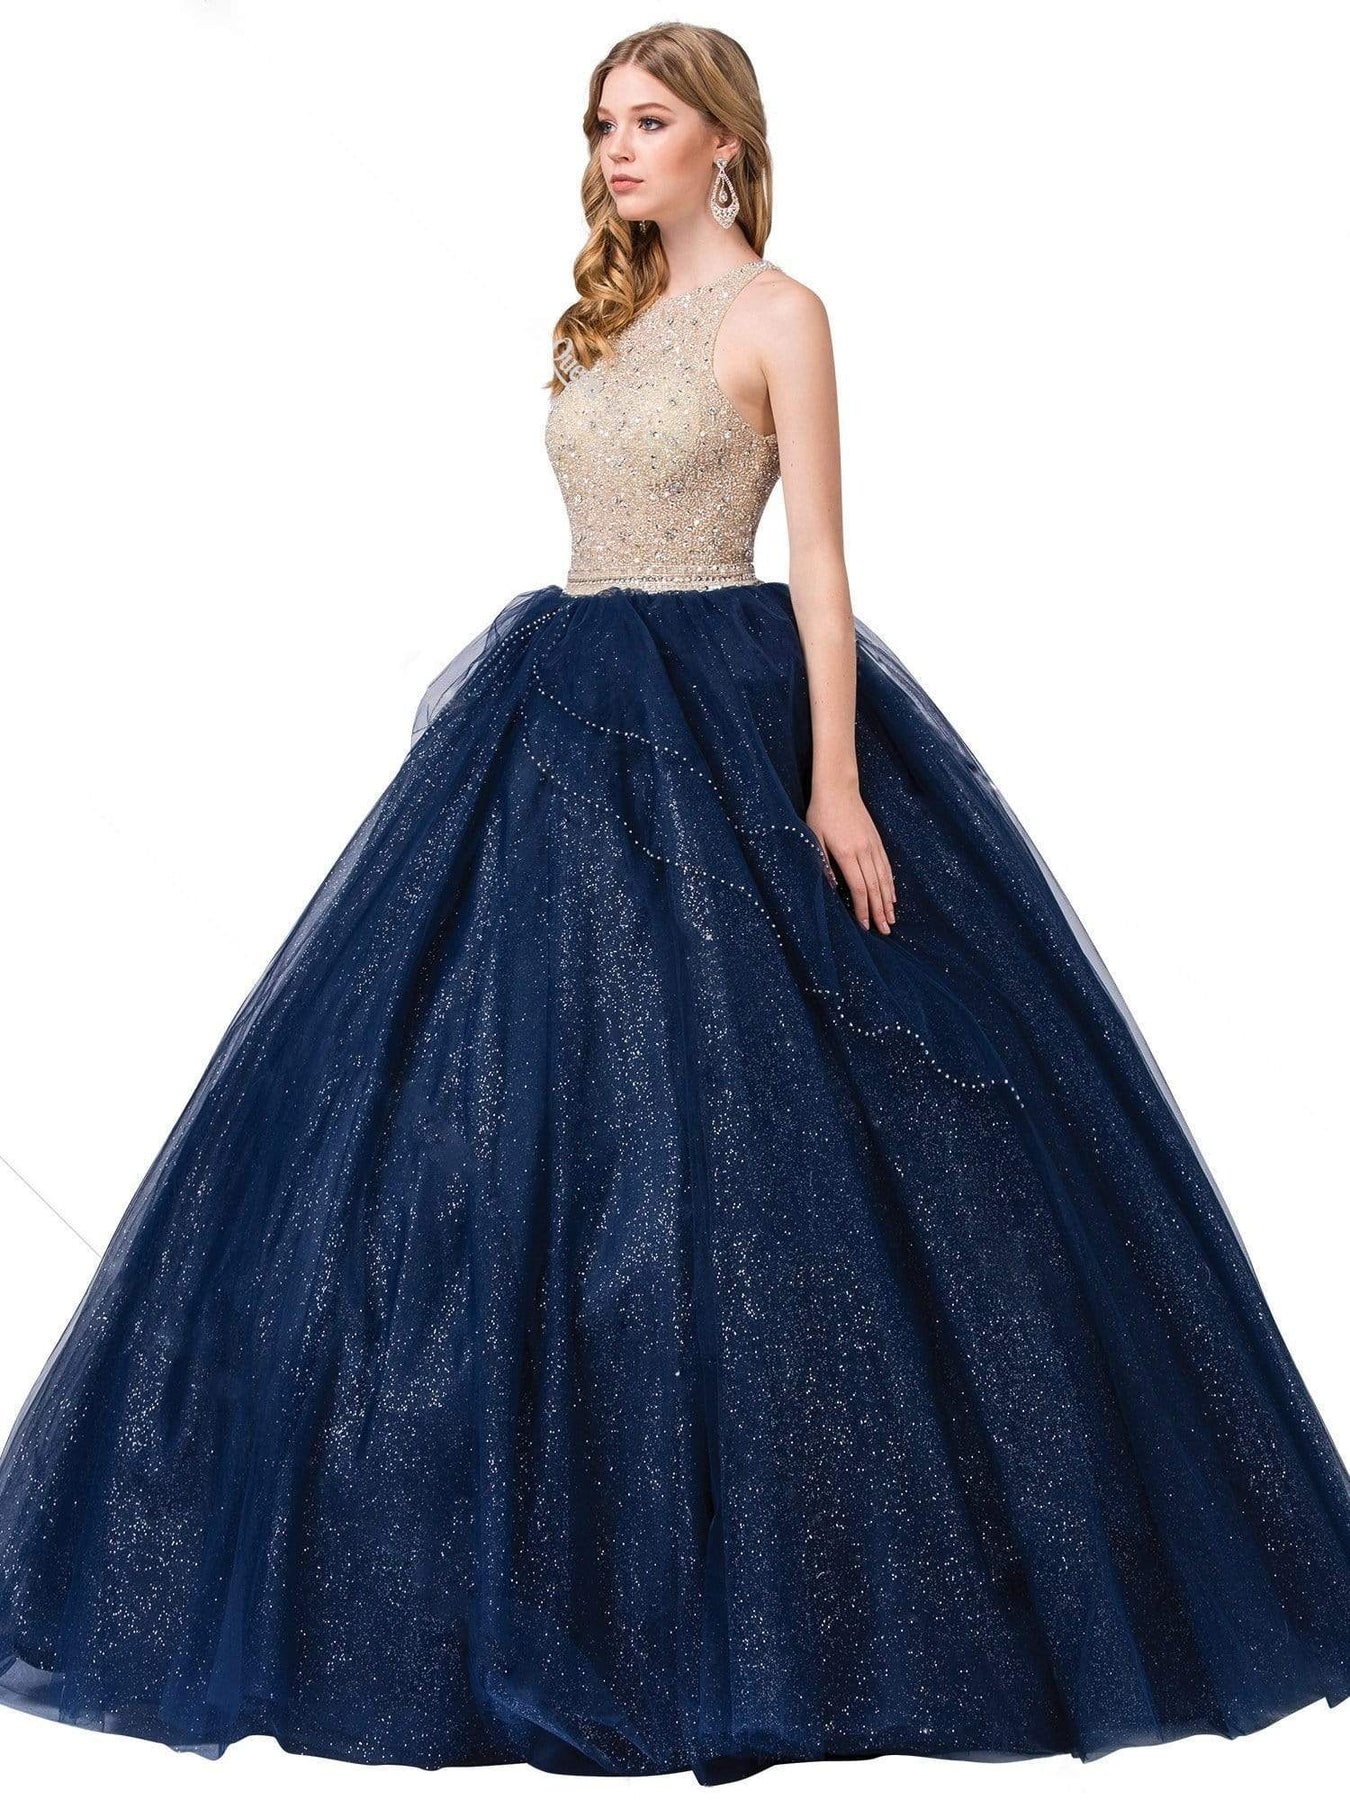 Dancing Queen - 1350 Jewel Studded Illusion Bodice Ballgown Special Occasion Dress XS / Navy